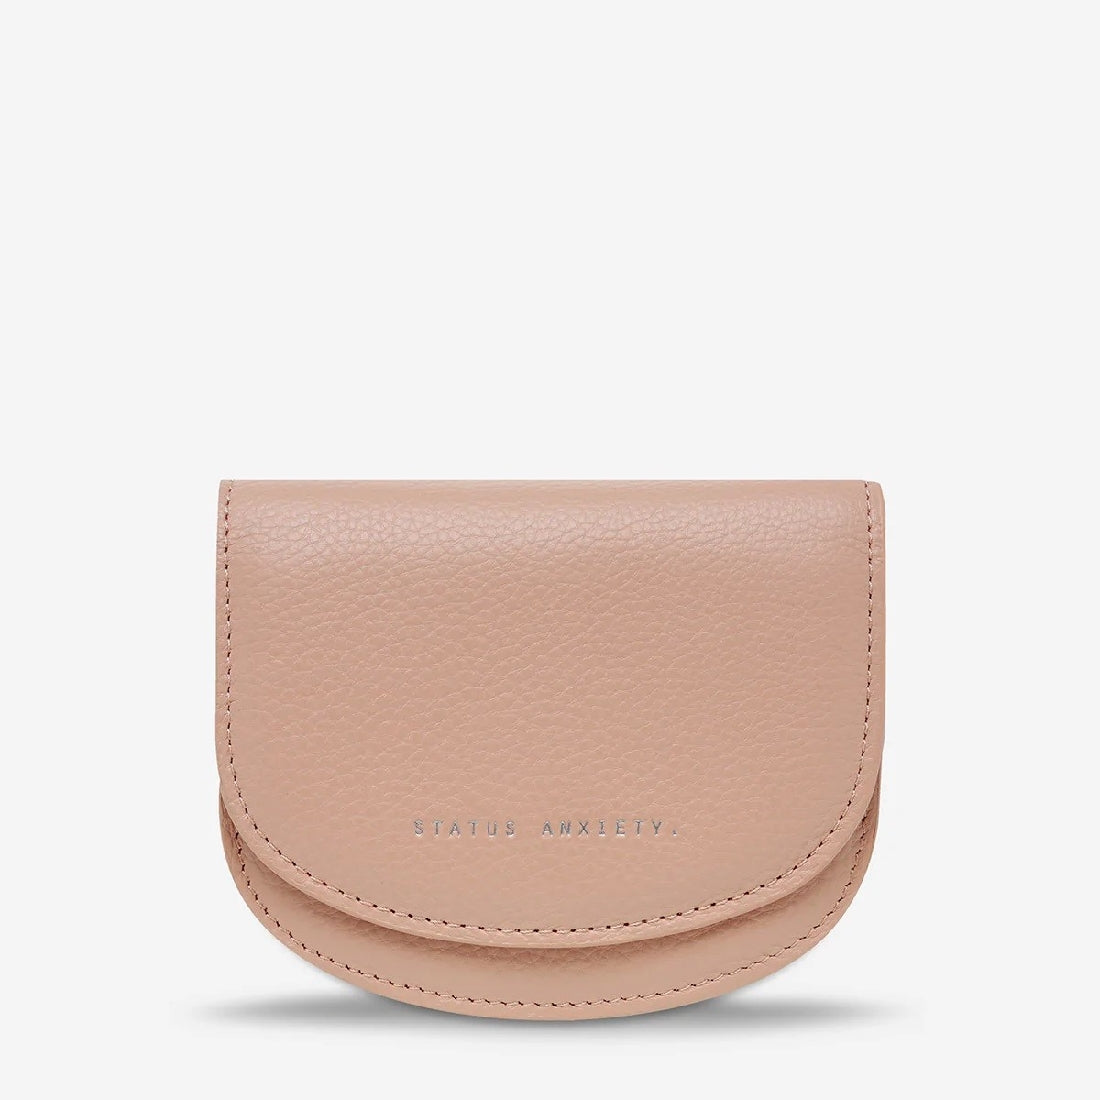 Status Anxiety Us For Now Coin Purse - Little Extras Lifestyle Boutique